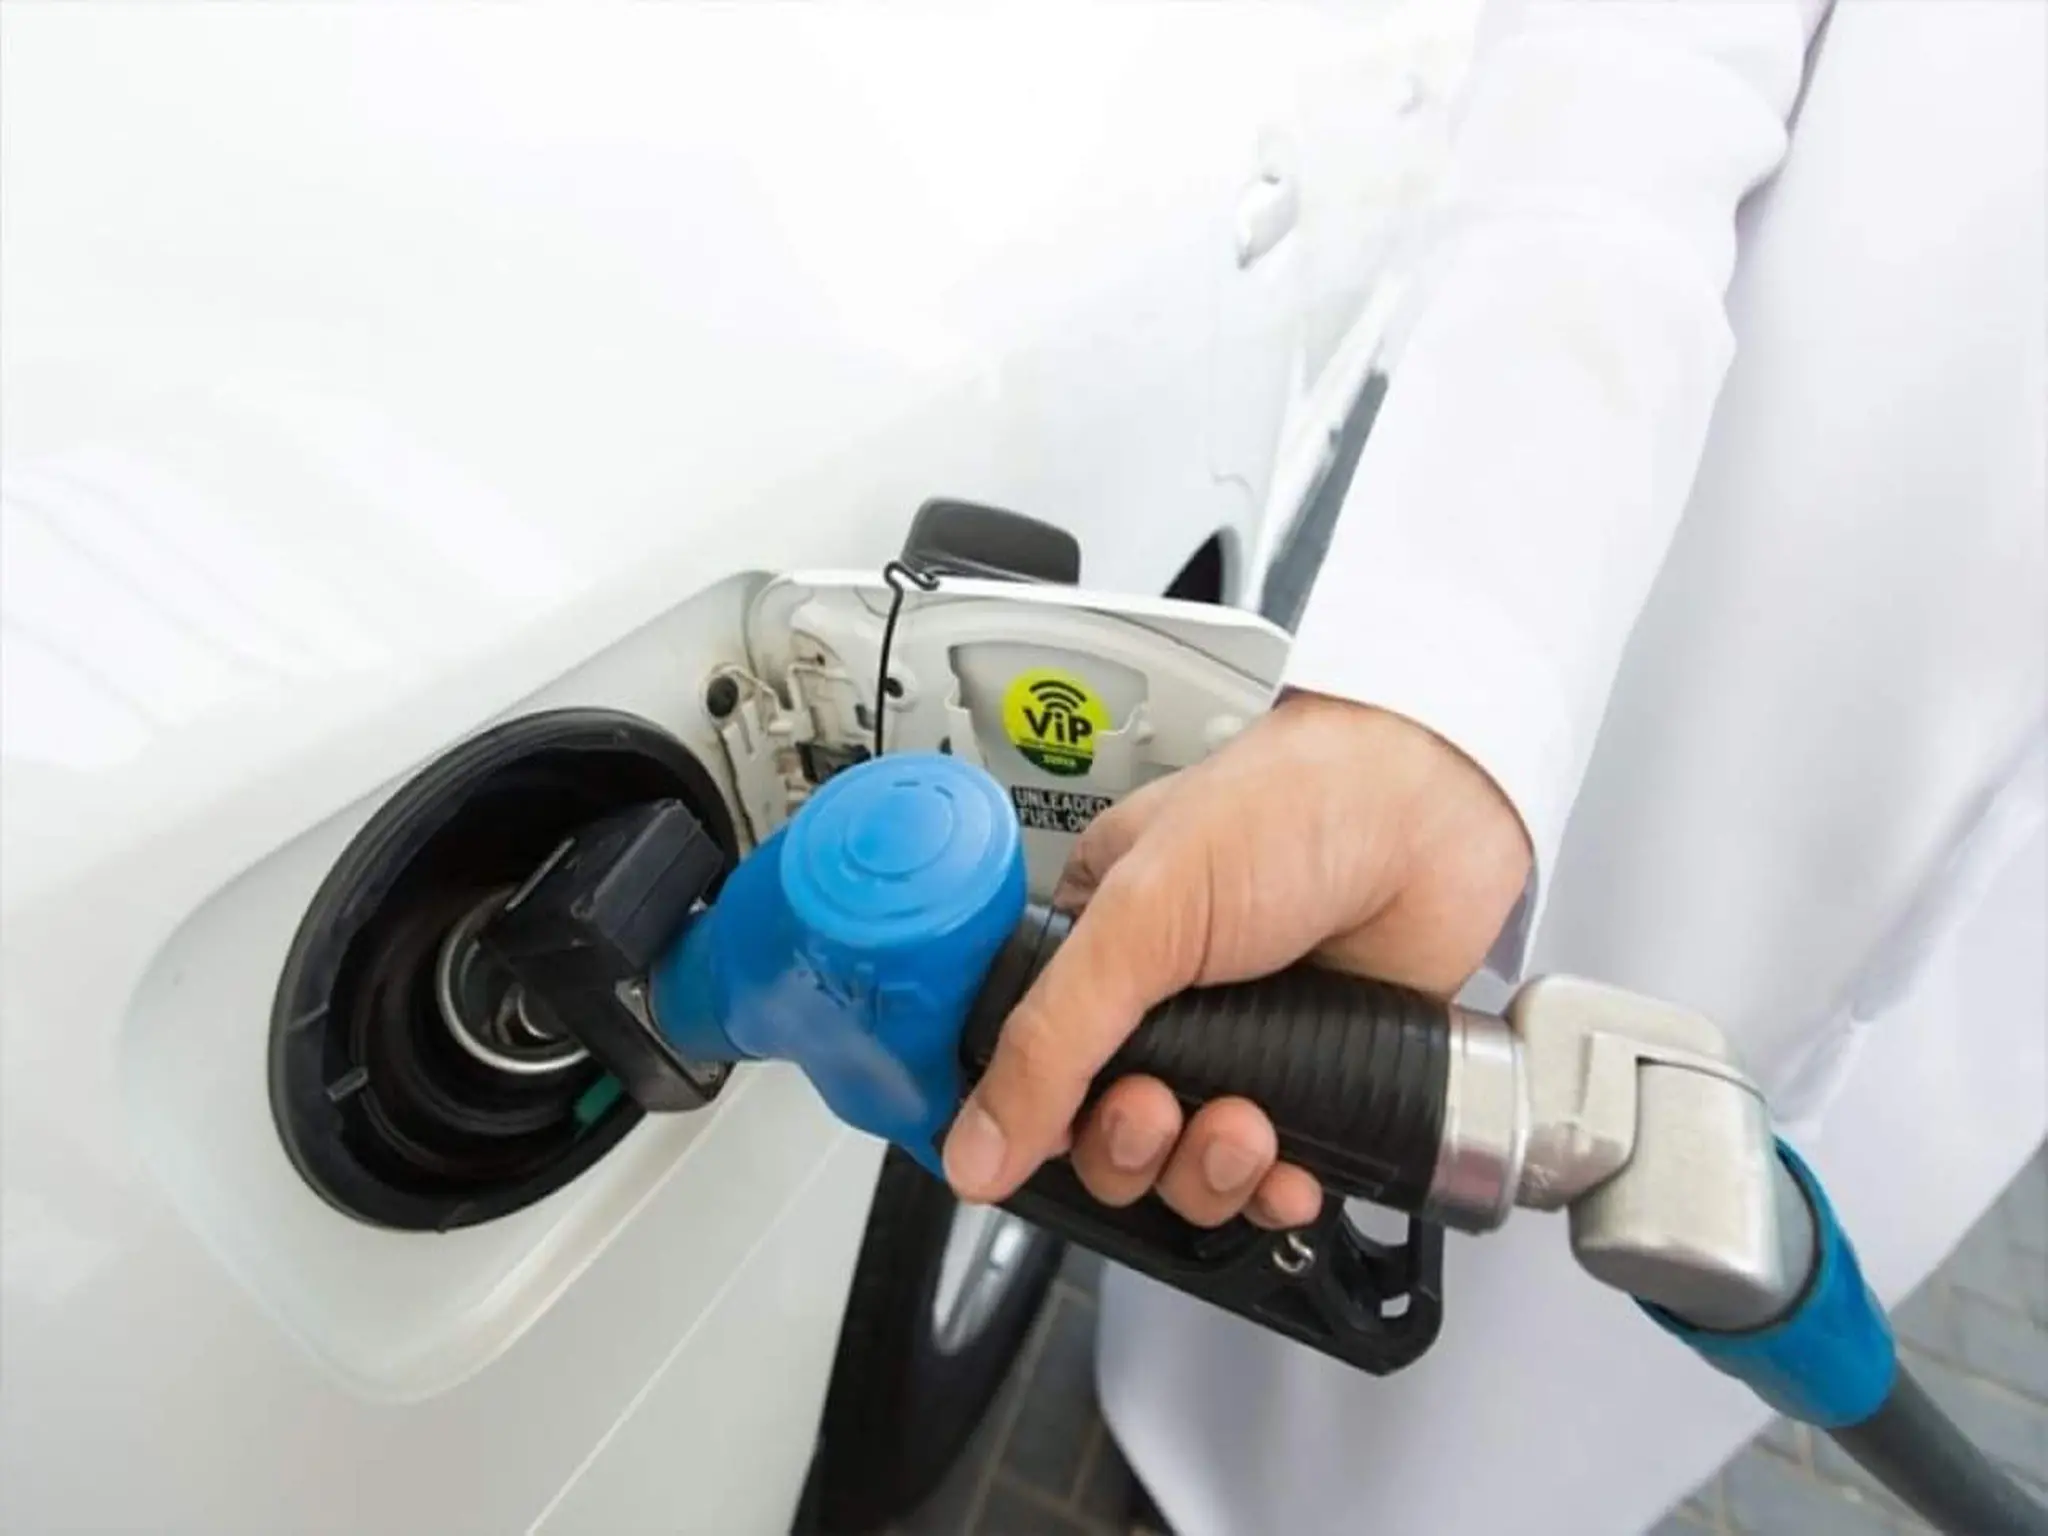 Urgent fuel prices: Gasoline prices rise in the UAE during the month of February